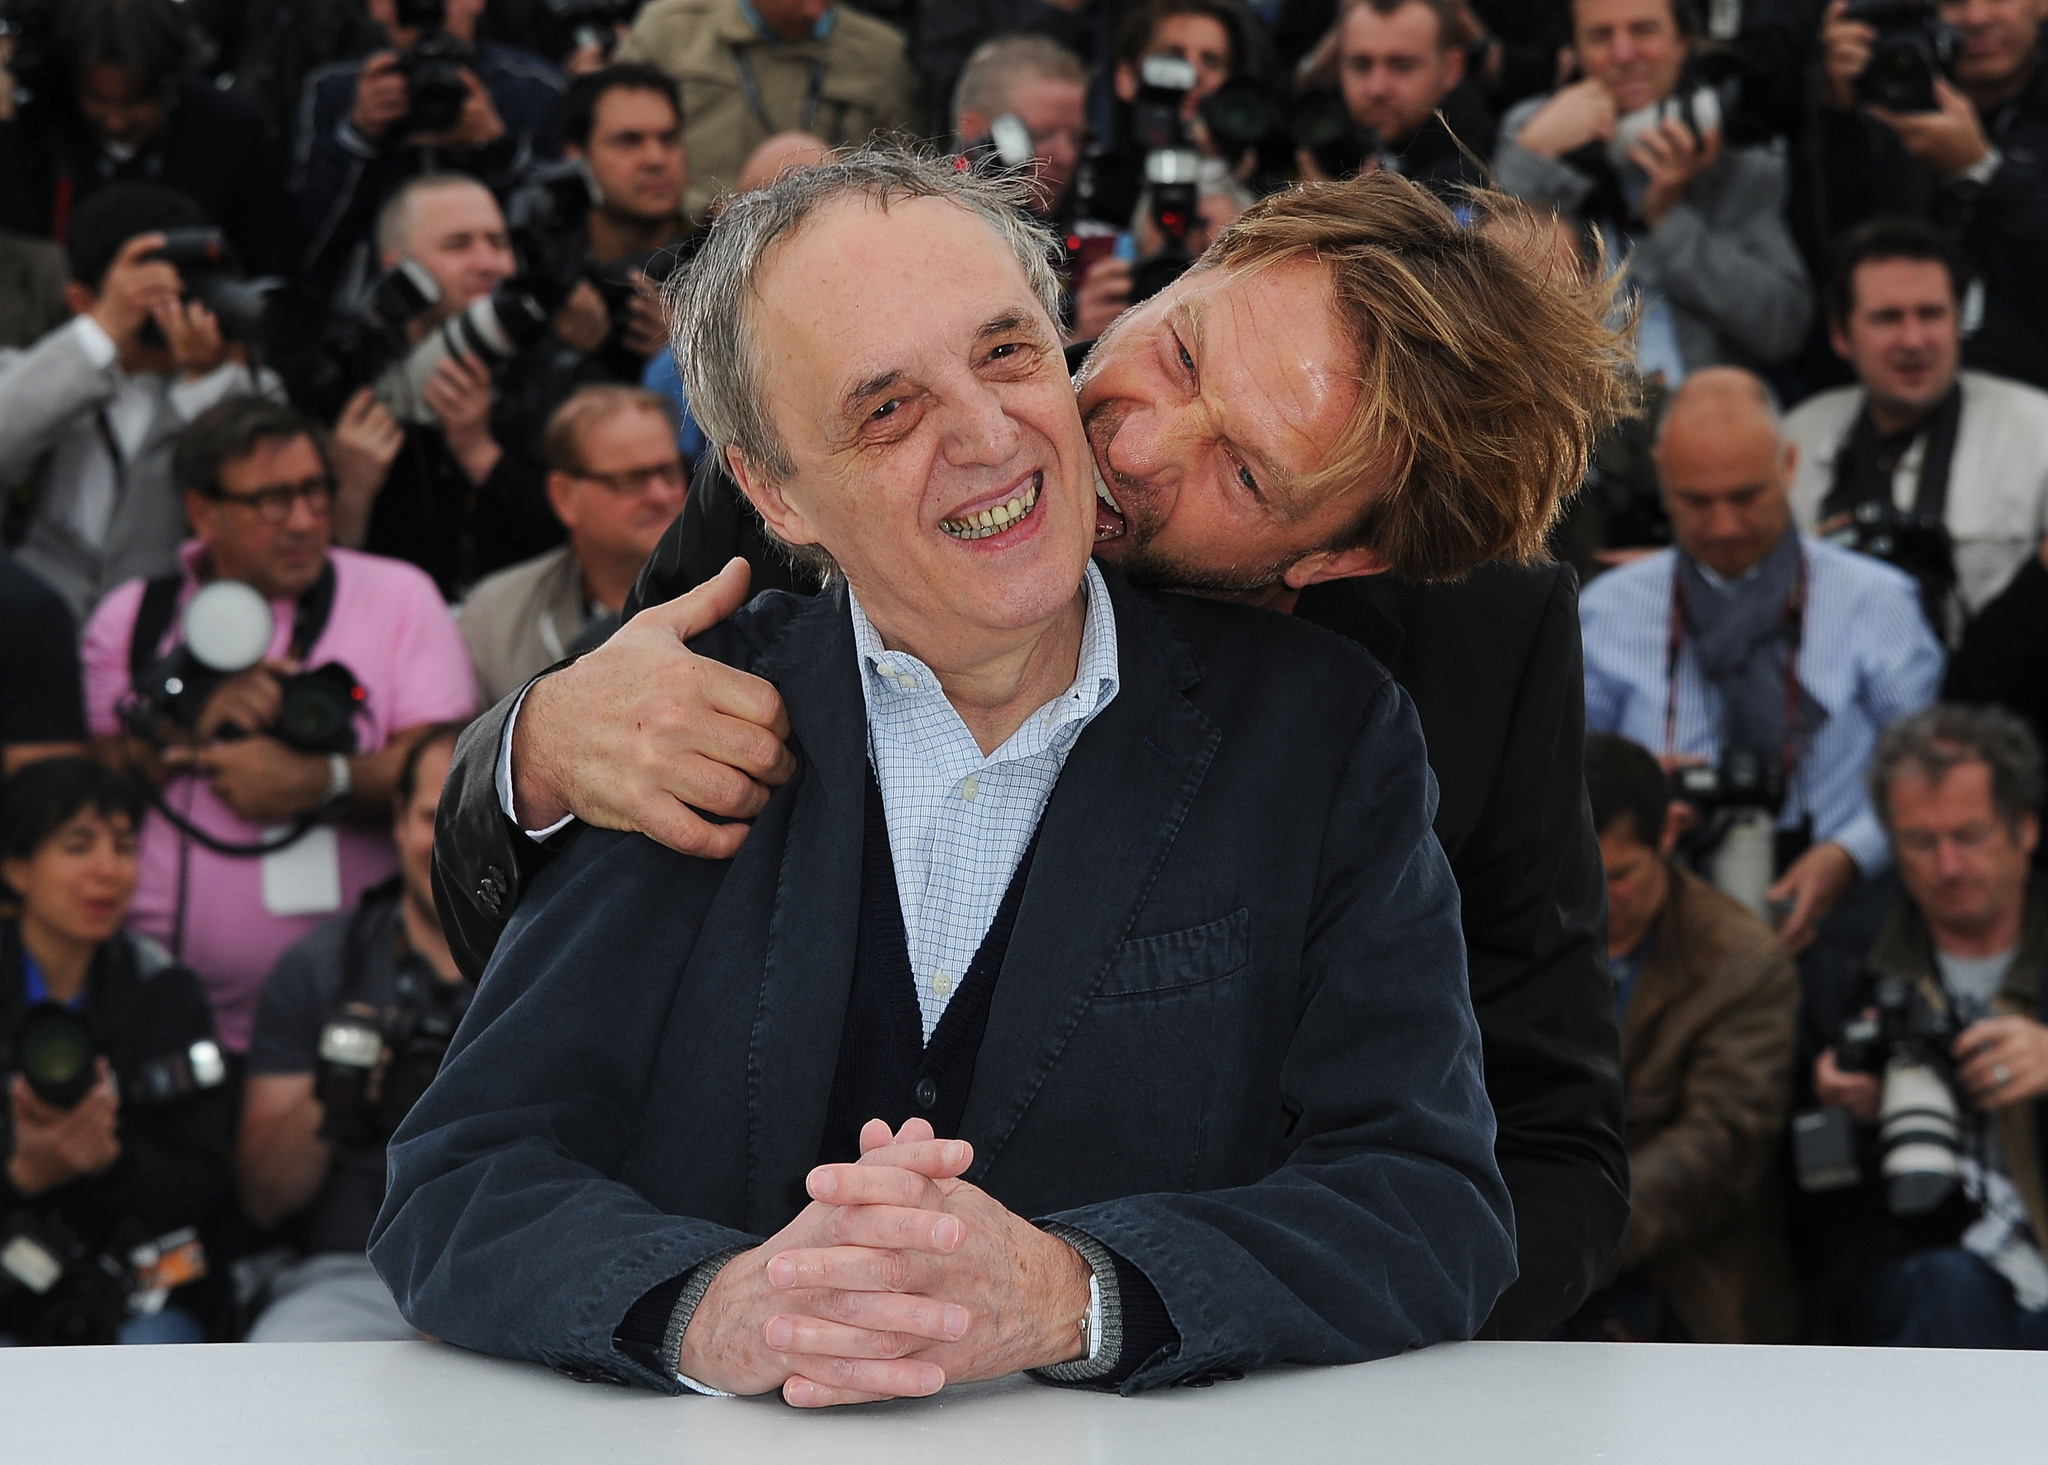 Dario Argento and Thomas Kretschmann at an event for Dracula 3D (2012)